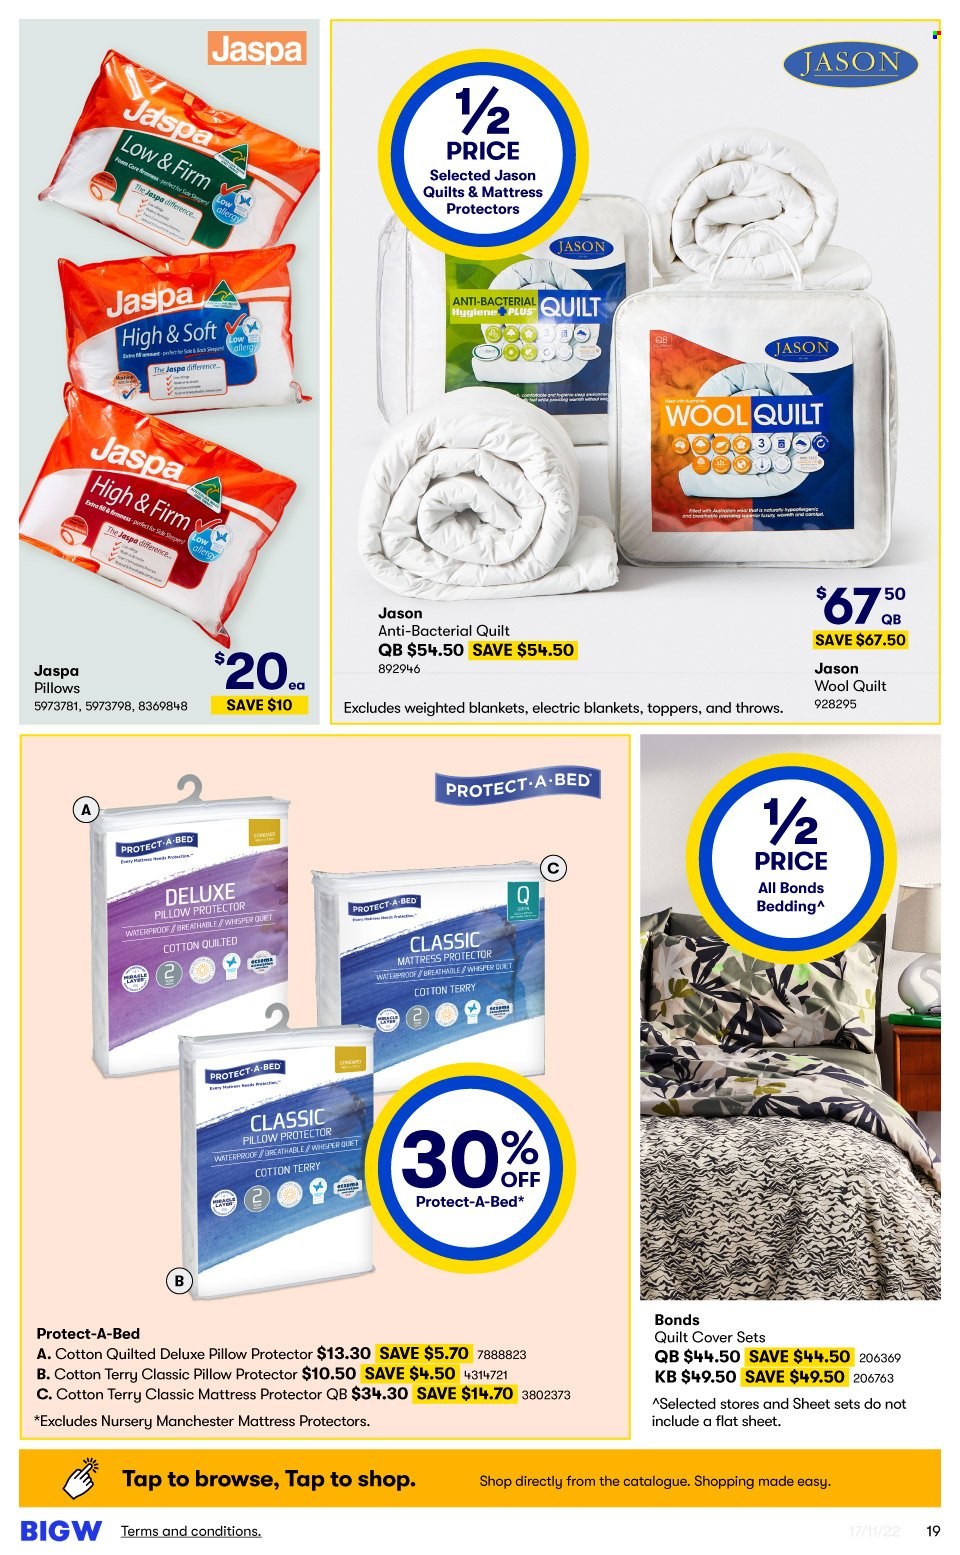 thumbnail - BIG W Catalogue - Sales products - Whisper, bedding, blanket, pillow, quilt, wool quilt, mattress protector, Protect-A-Bed, electric blanket, Bonds. Page 19.